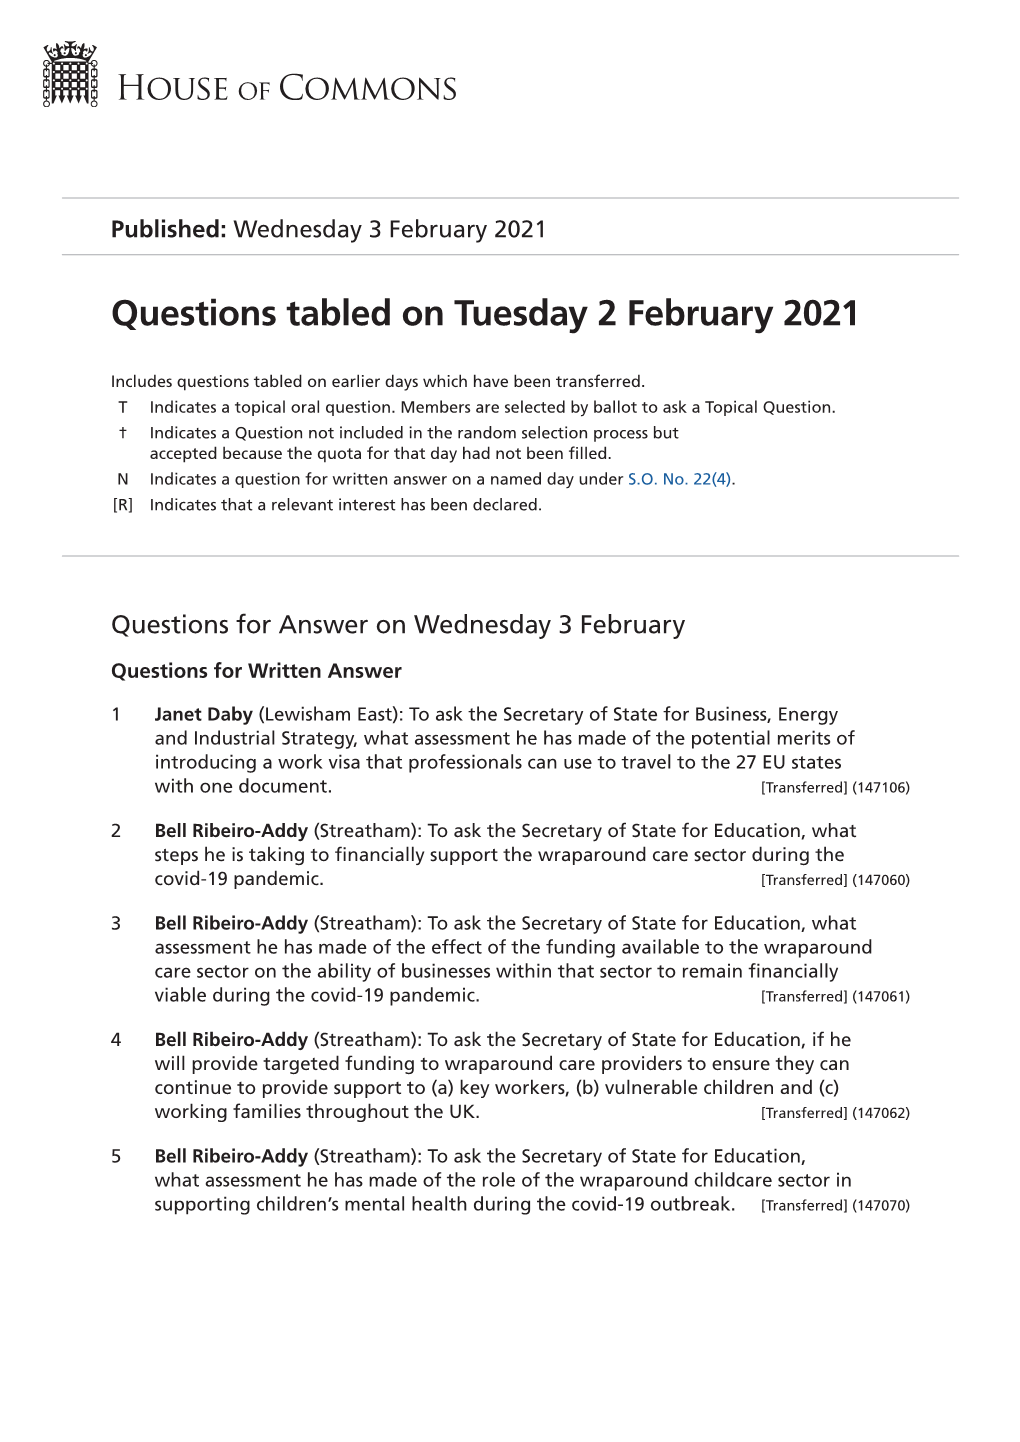 Questions Tabled on Tue 2 Feb 2021